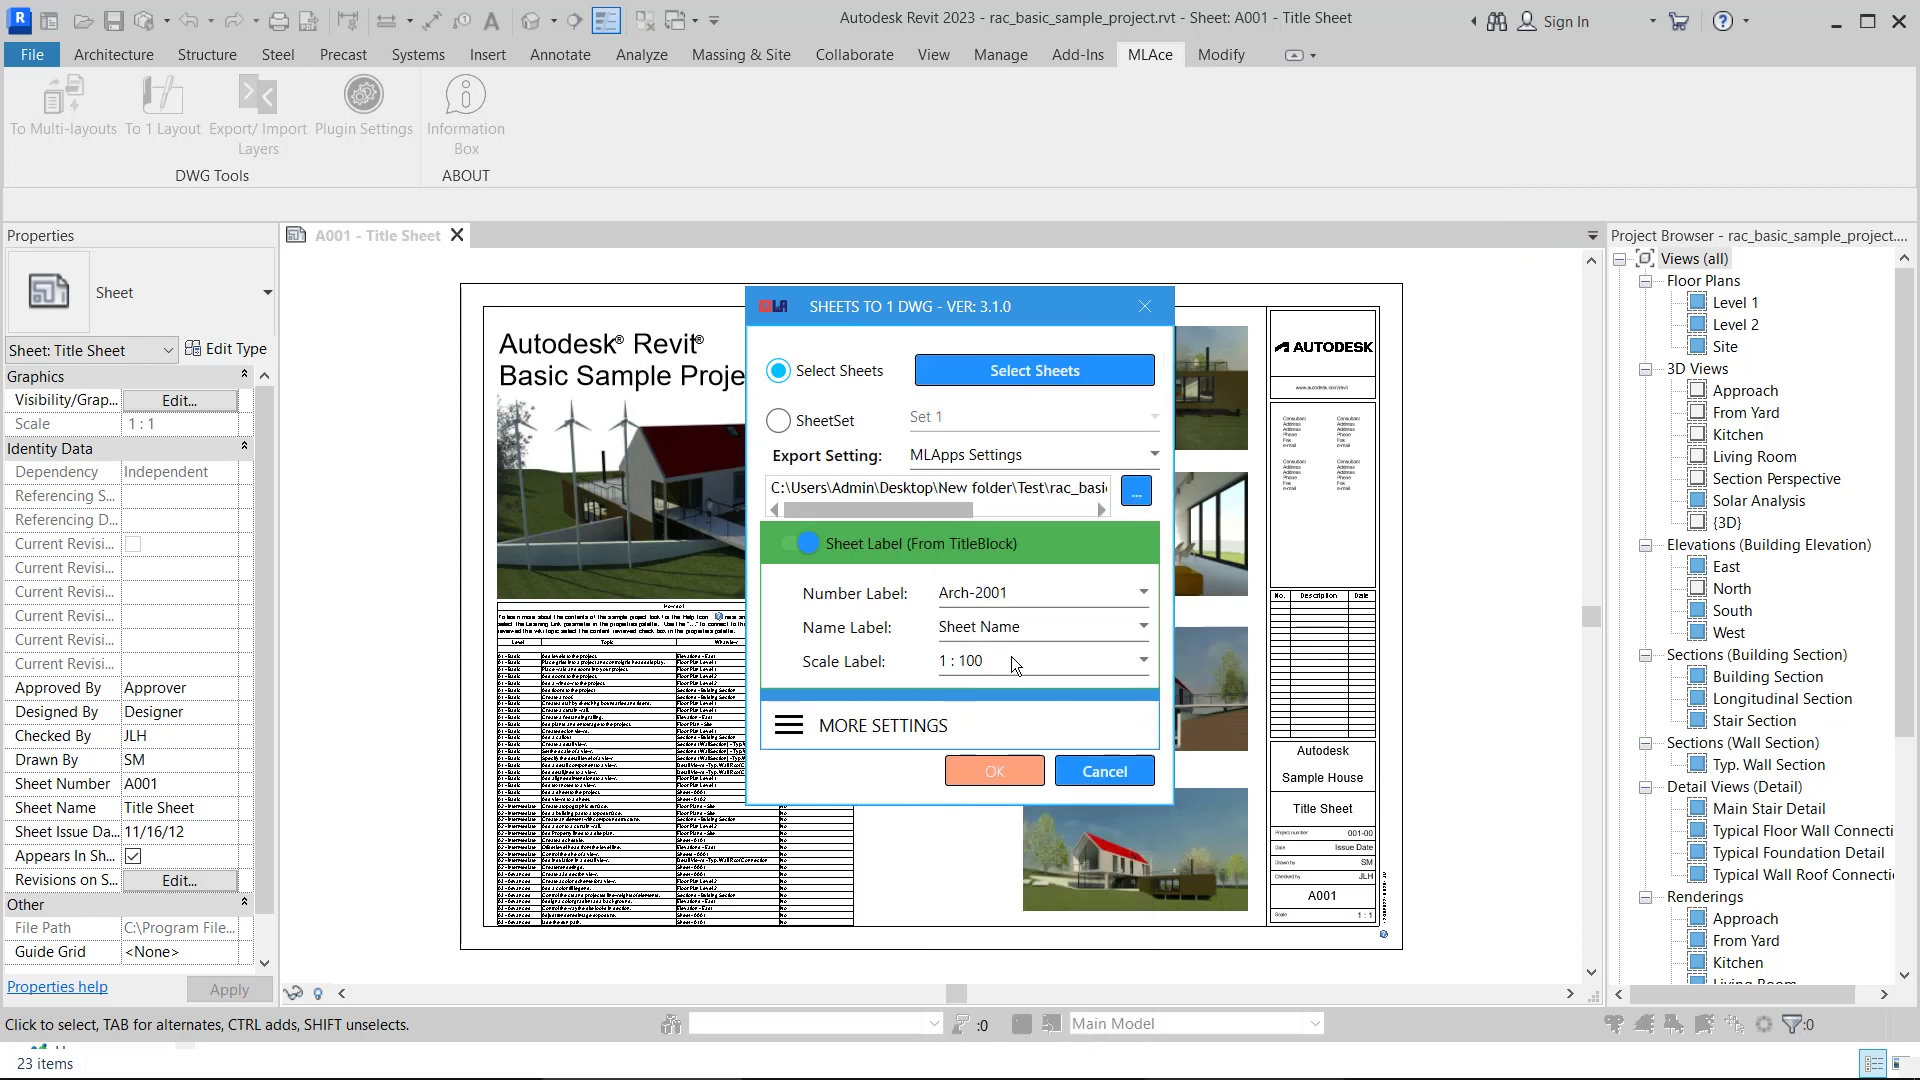 revit-groups-are-awesome-how-to-make-and-edit-revit-groups-8020-bim